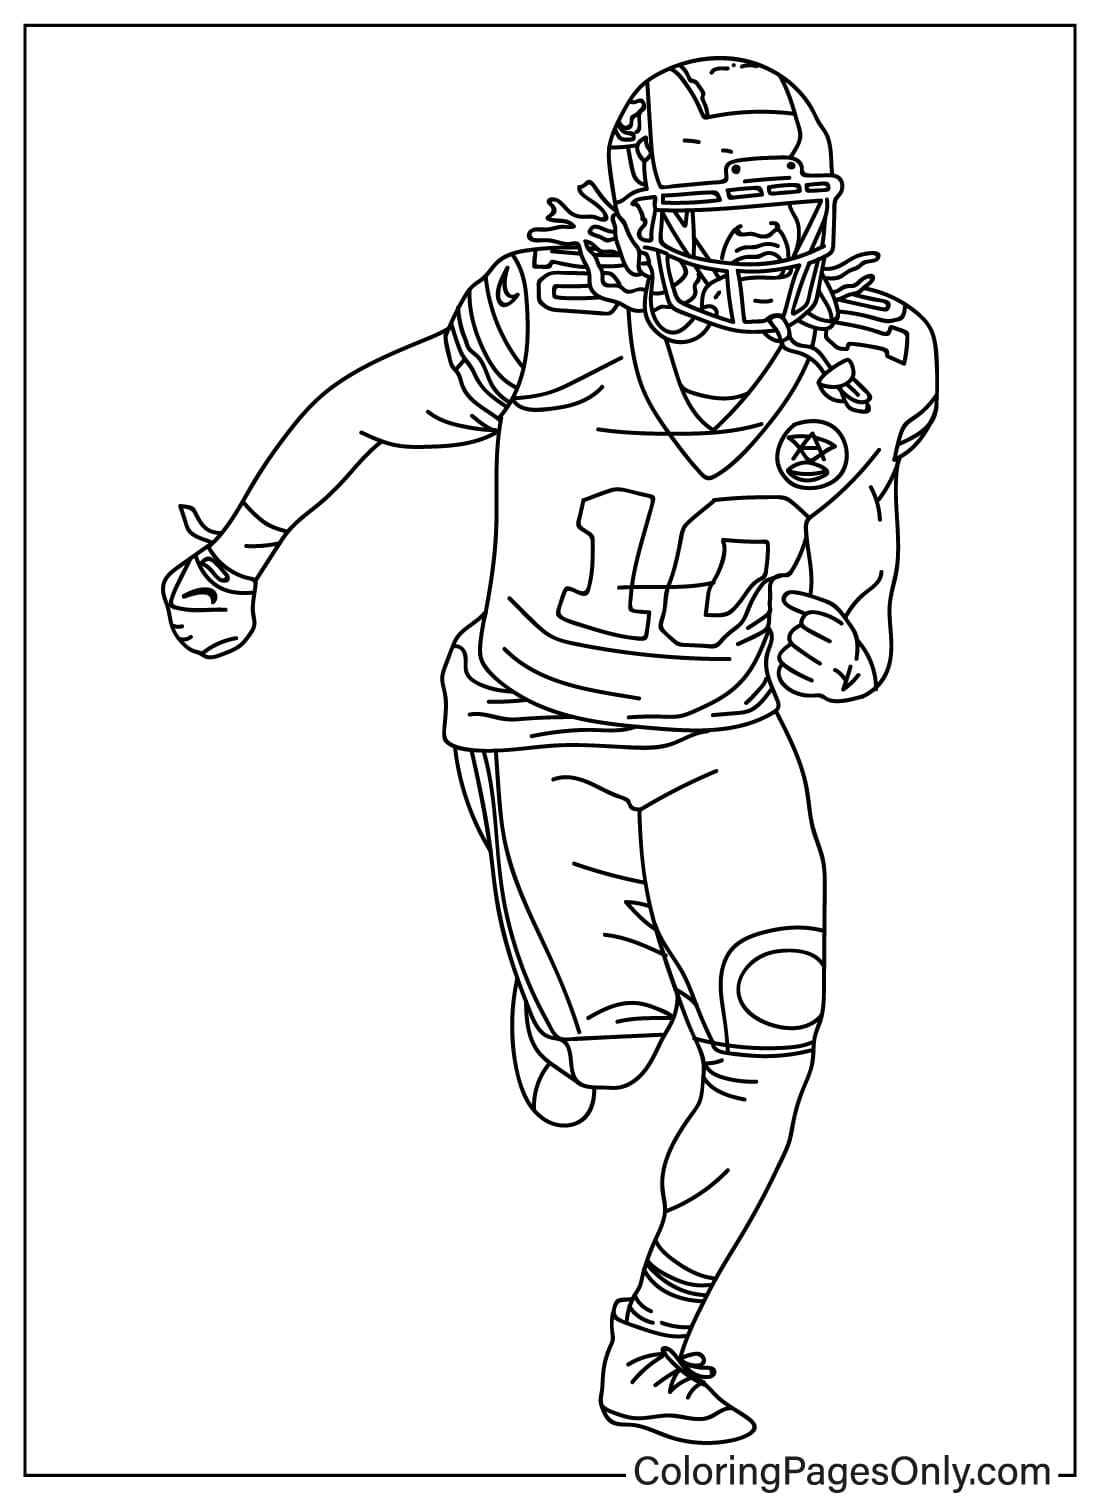 Isiah Pacheco Coloring Page